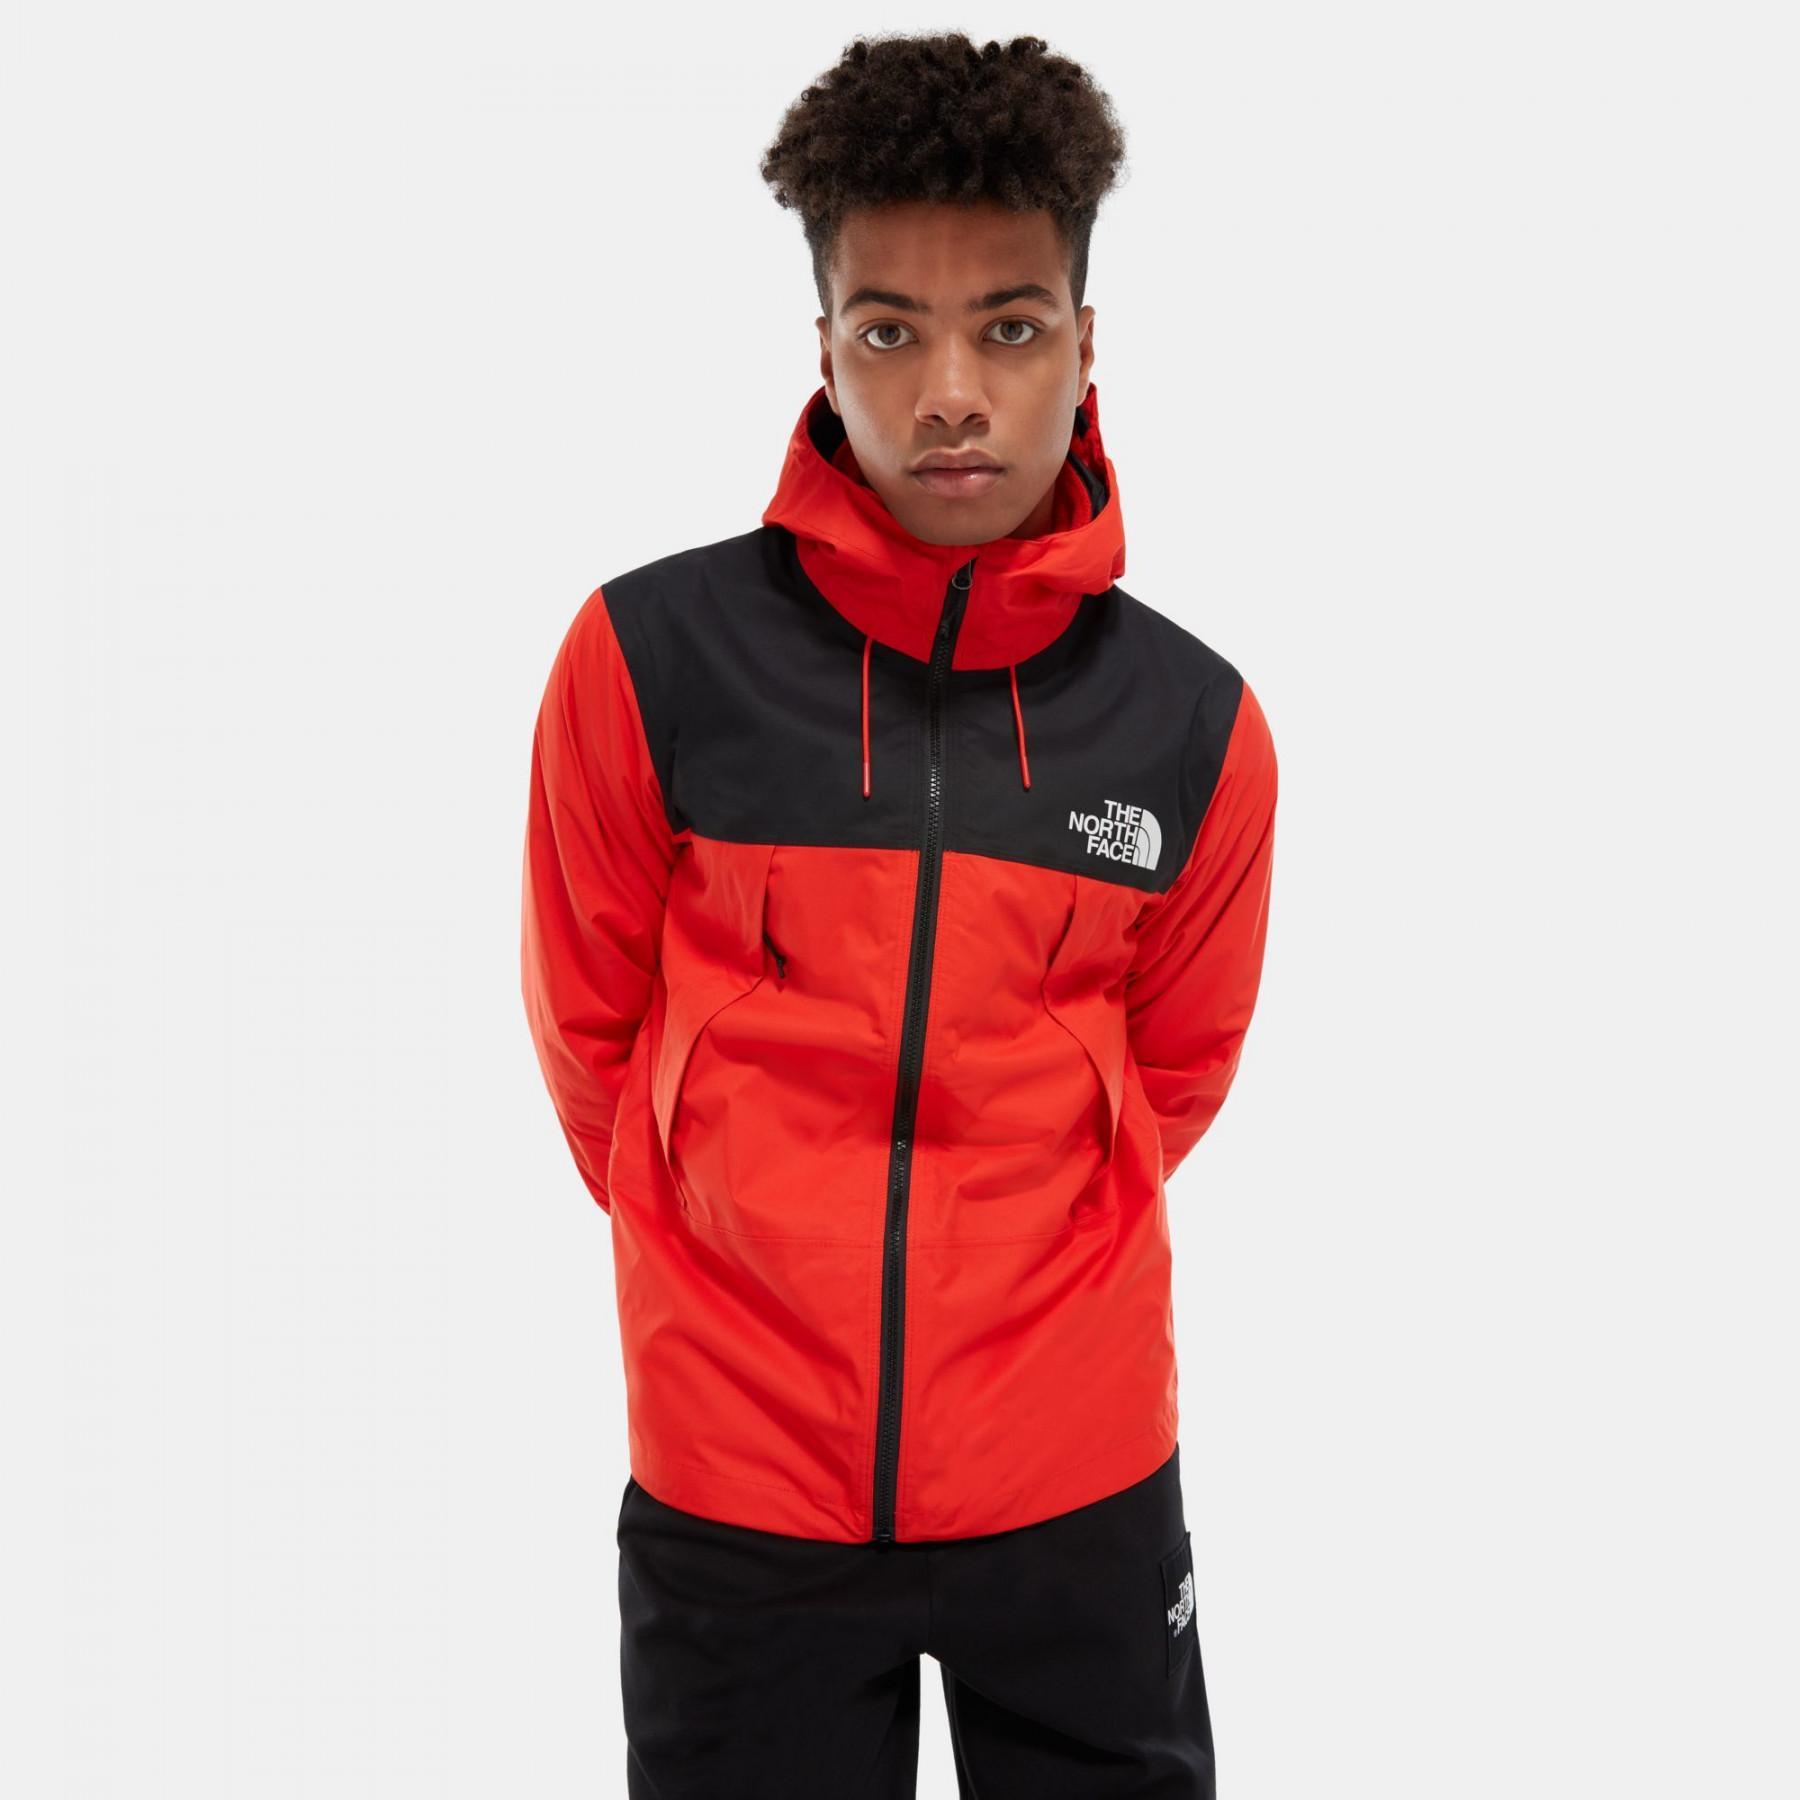 Jas The North Face 1990 Mountain Q